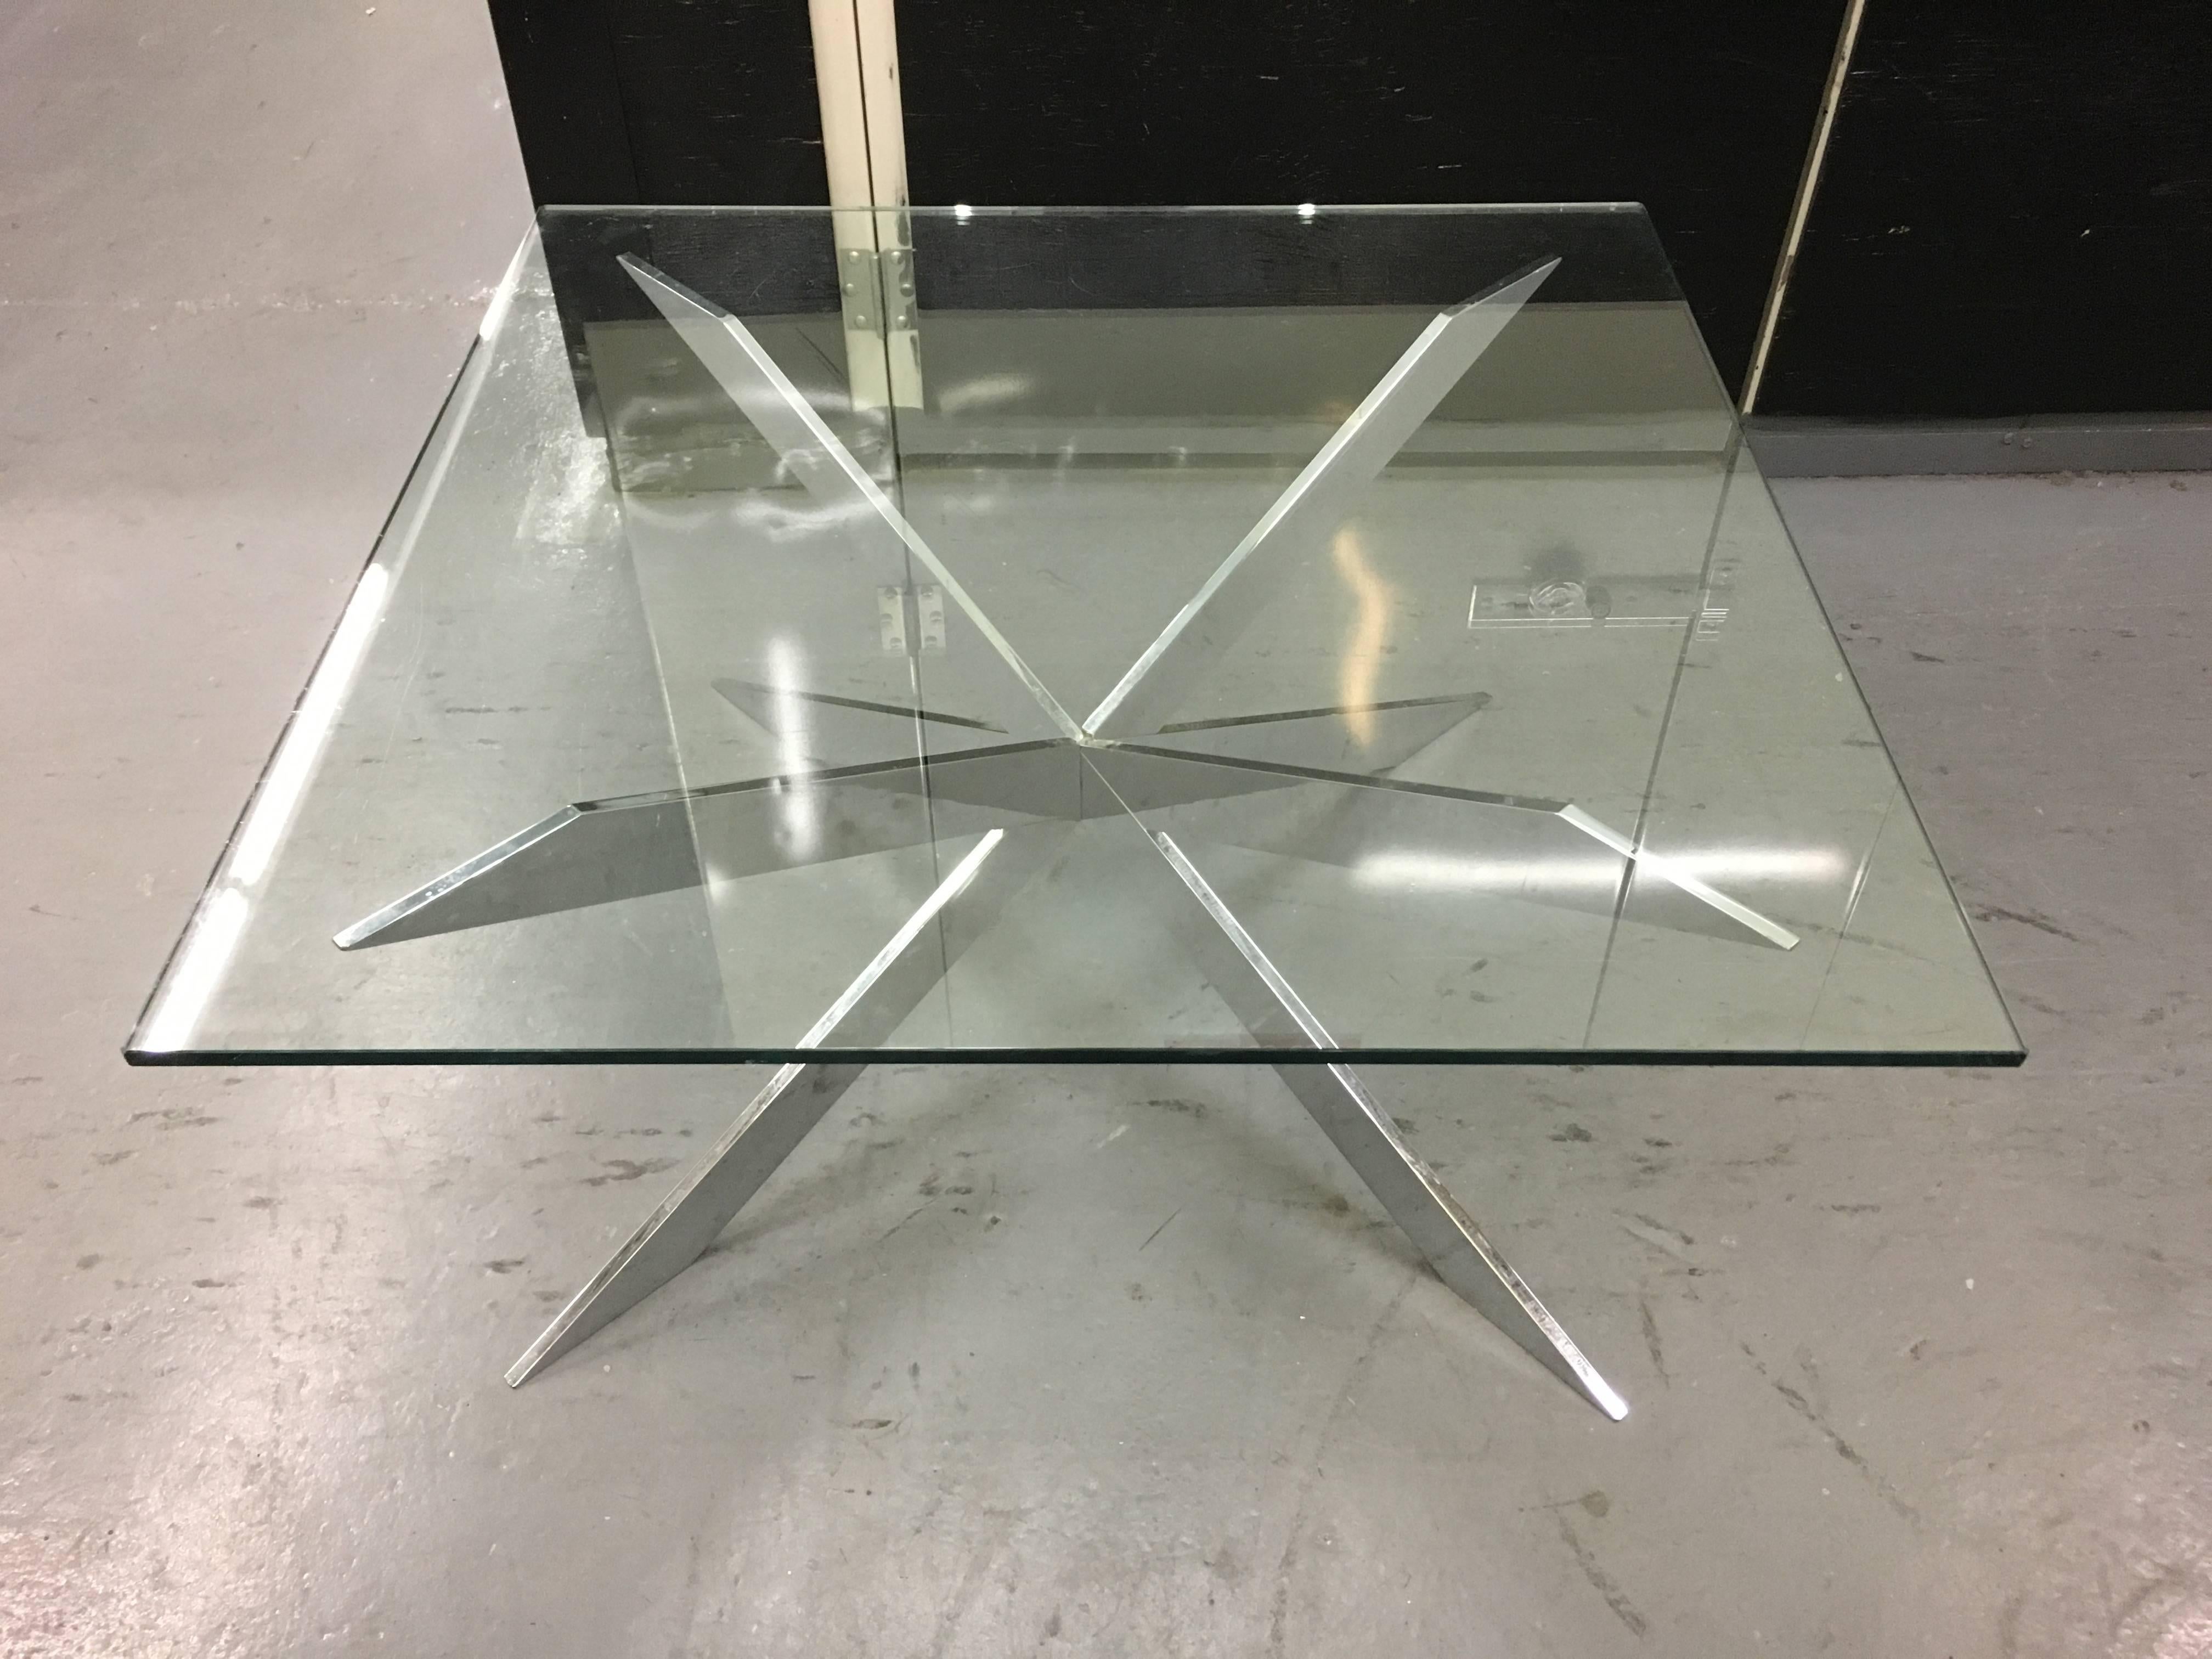 Square Pace cocktail table in heavy chrome and glass.